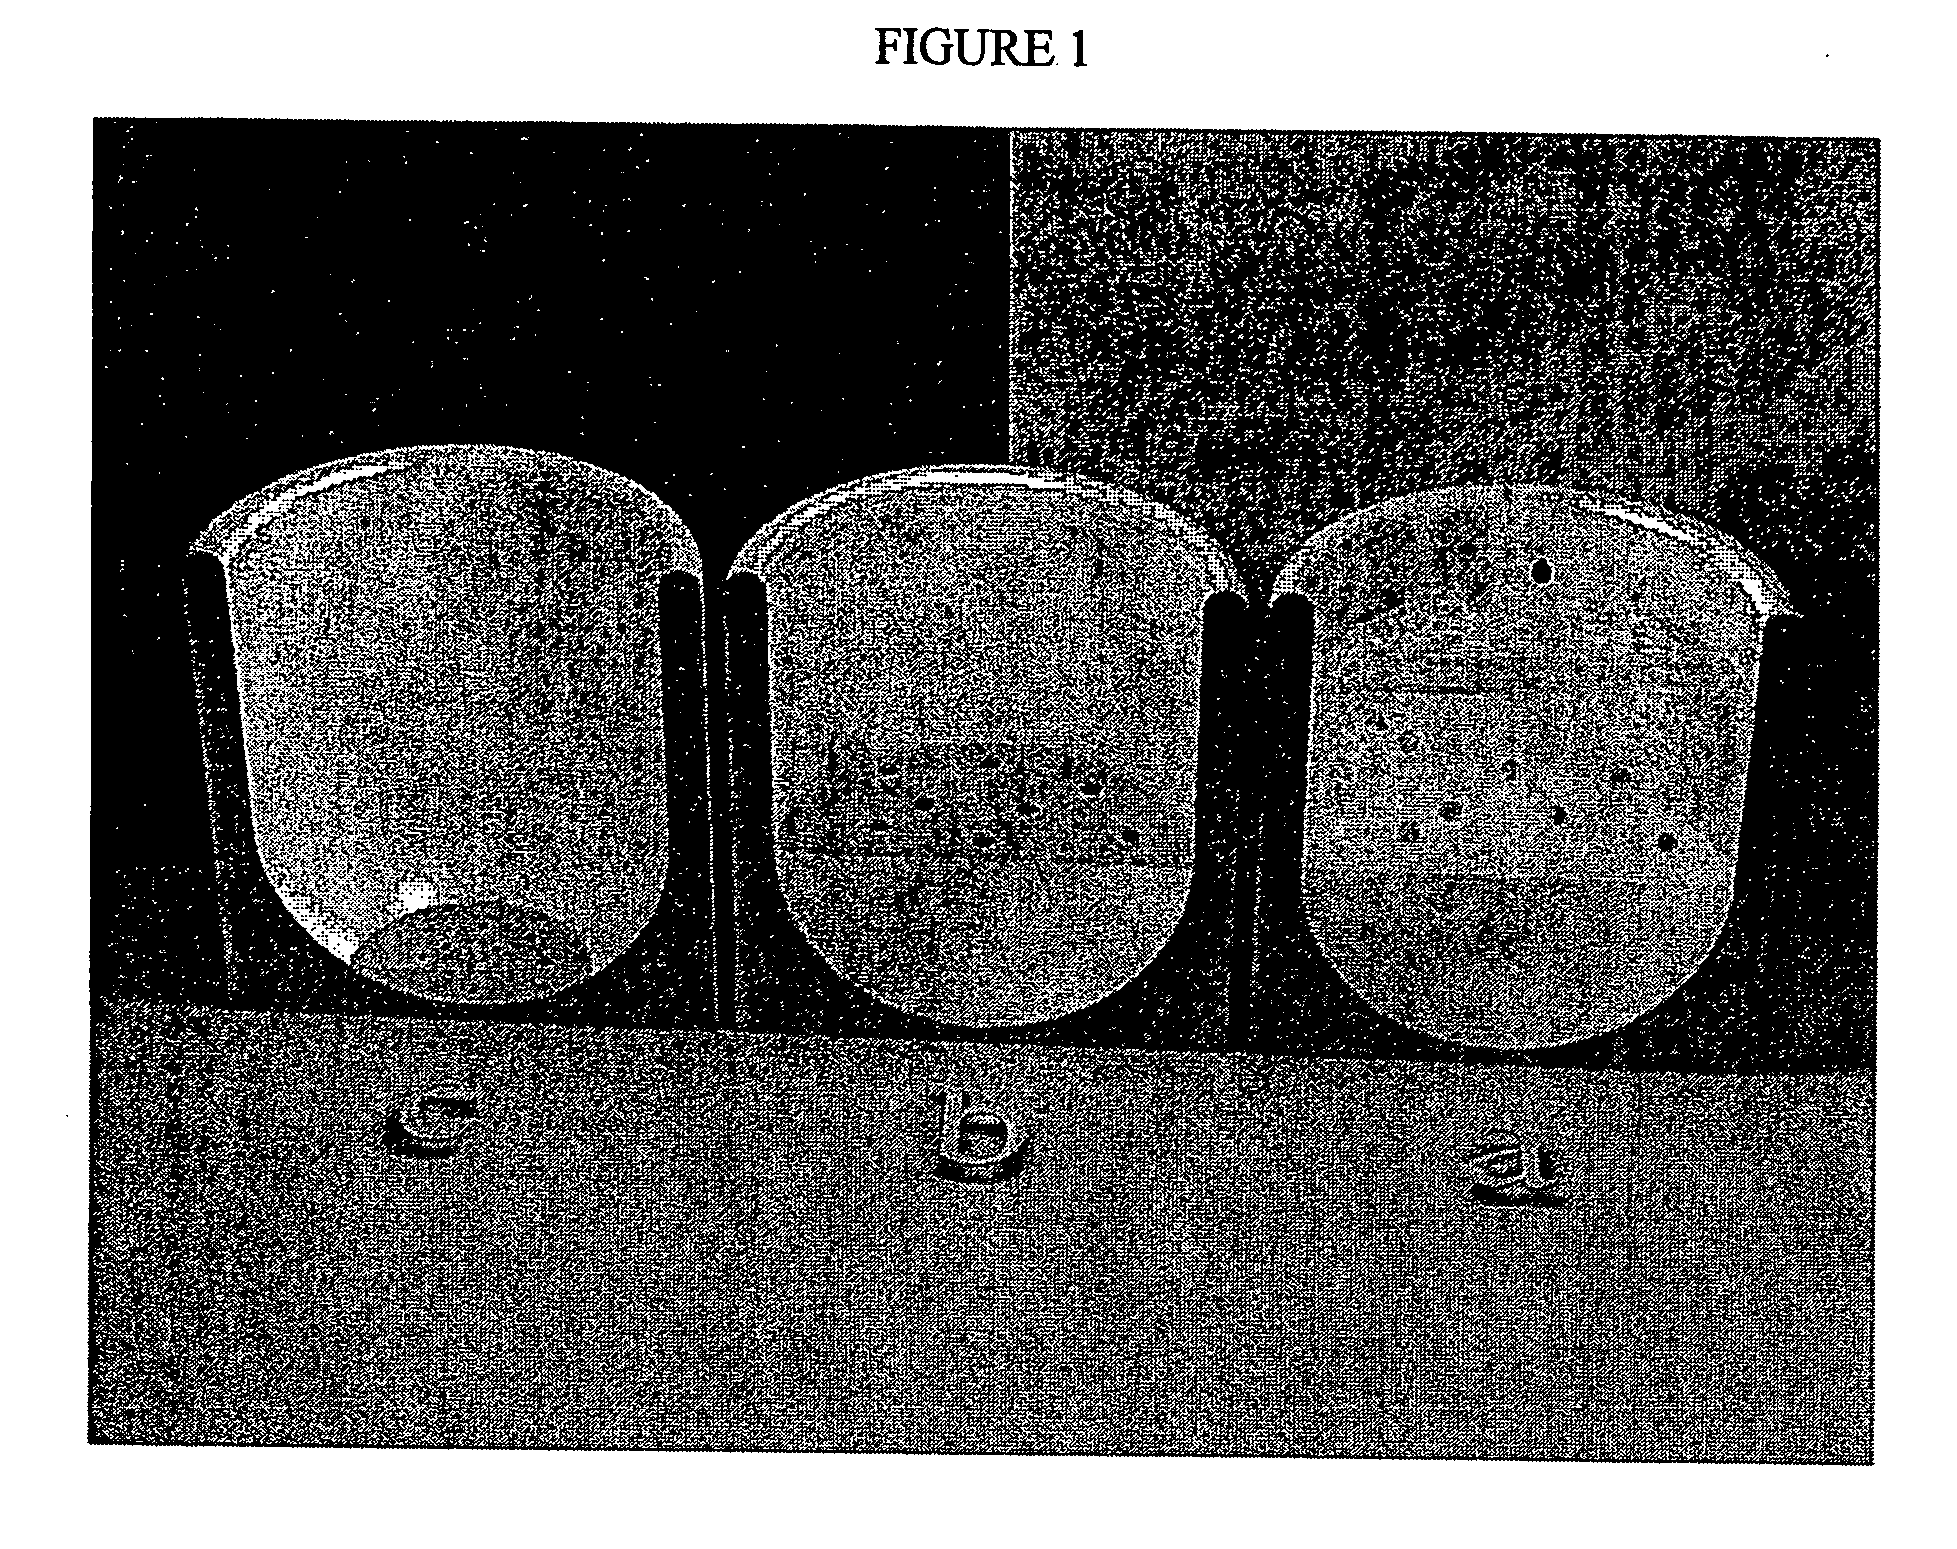 Loadable polymeric particles for therapeutic and/or diagnostic applications and methods of preparing and using the same